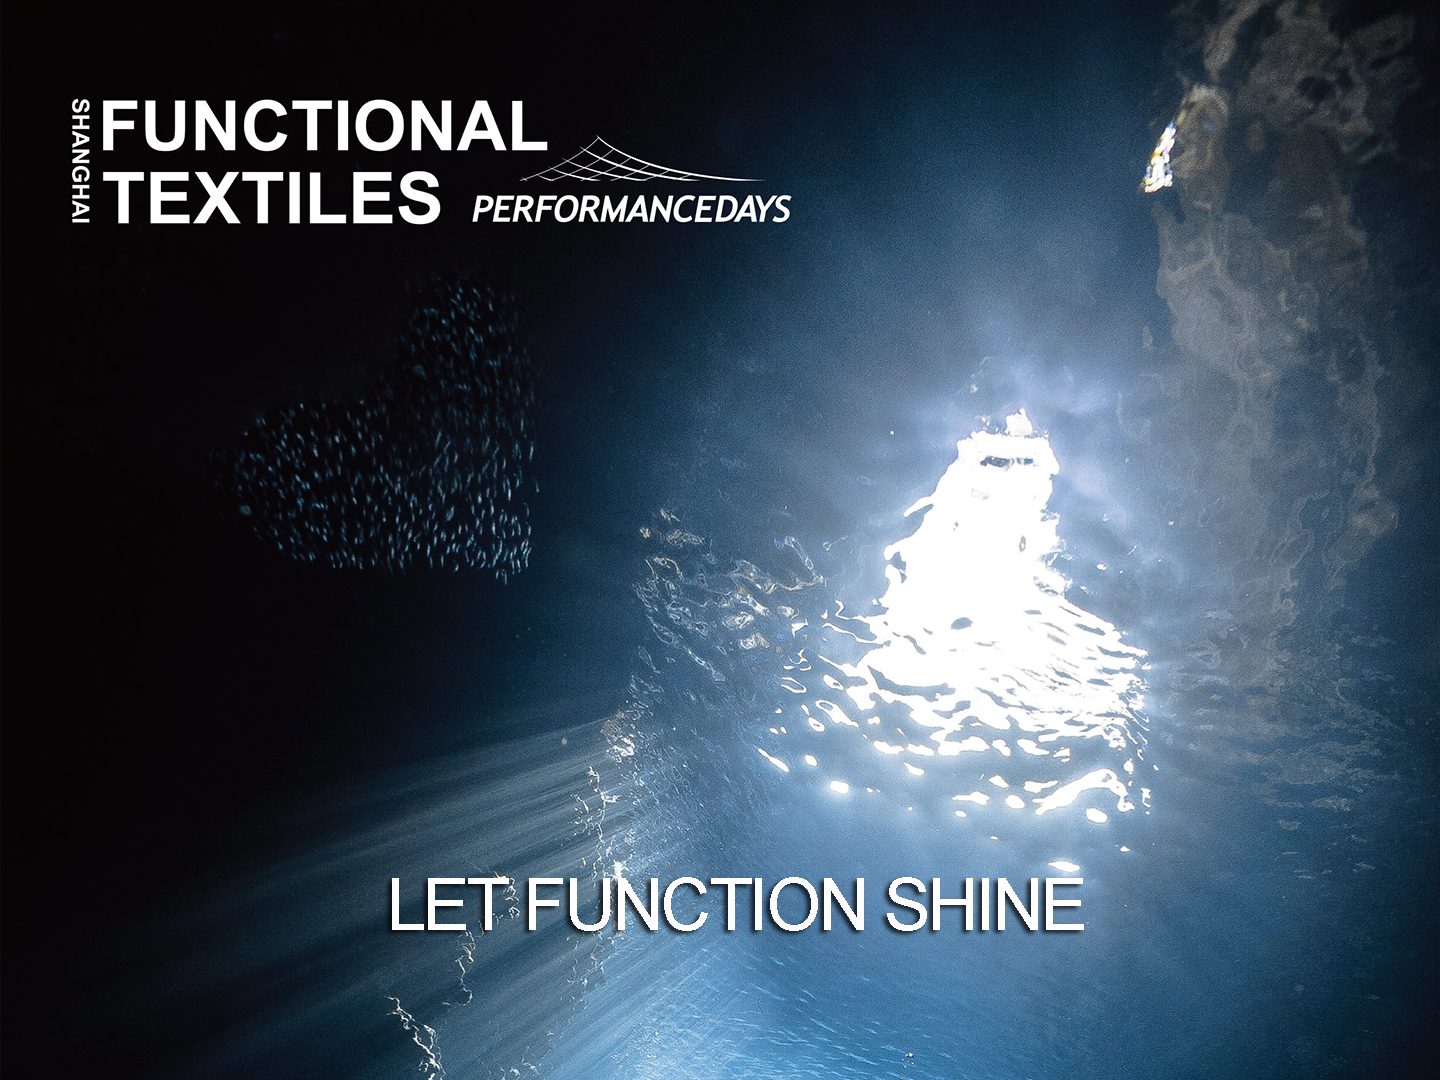 FUNCTIONAL TEXTILES SHANGHAI by PERFORMANCE DAYS